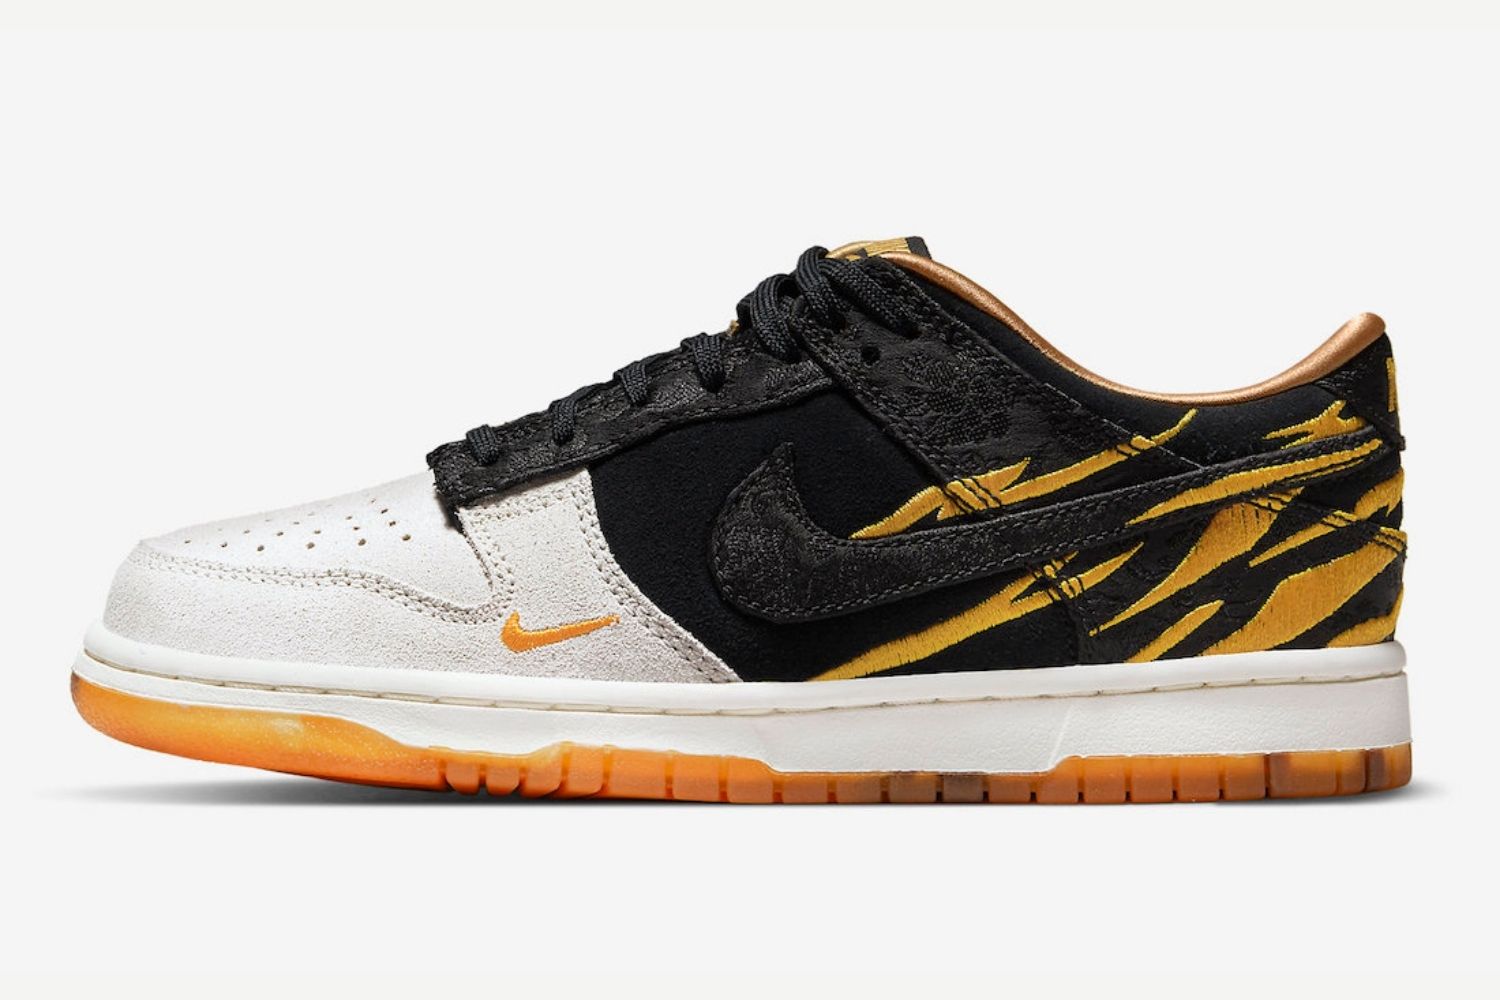 De Nike Dunk Low 'Year of the Tiger' dropt in 2022